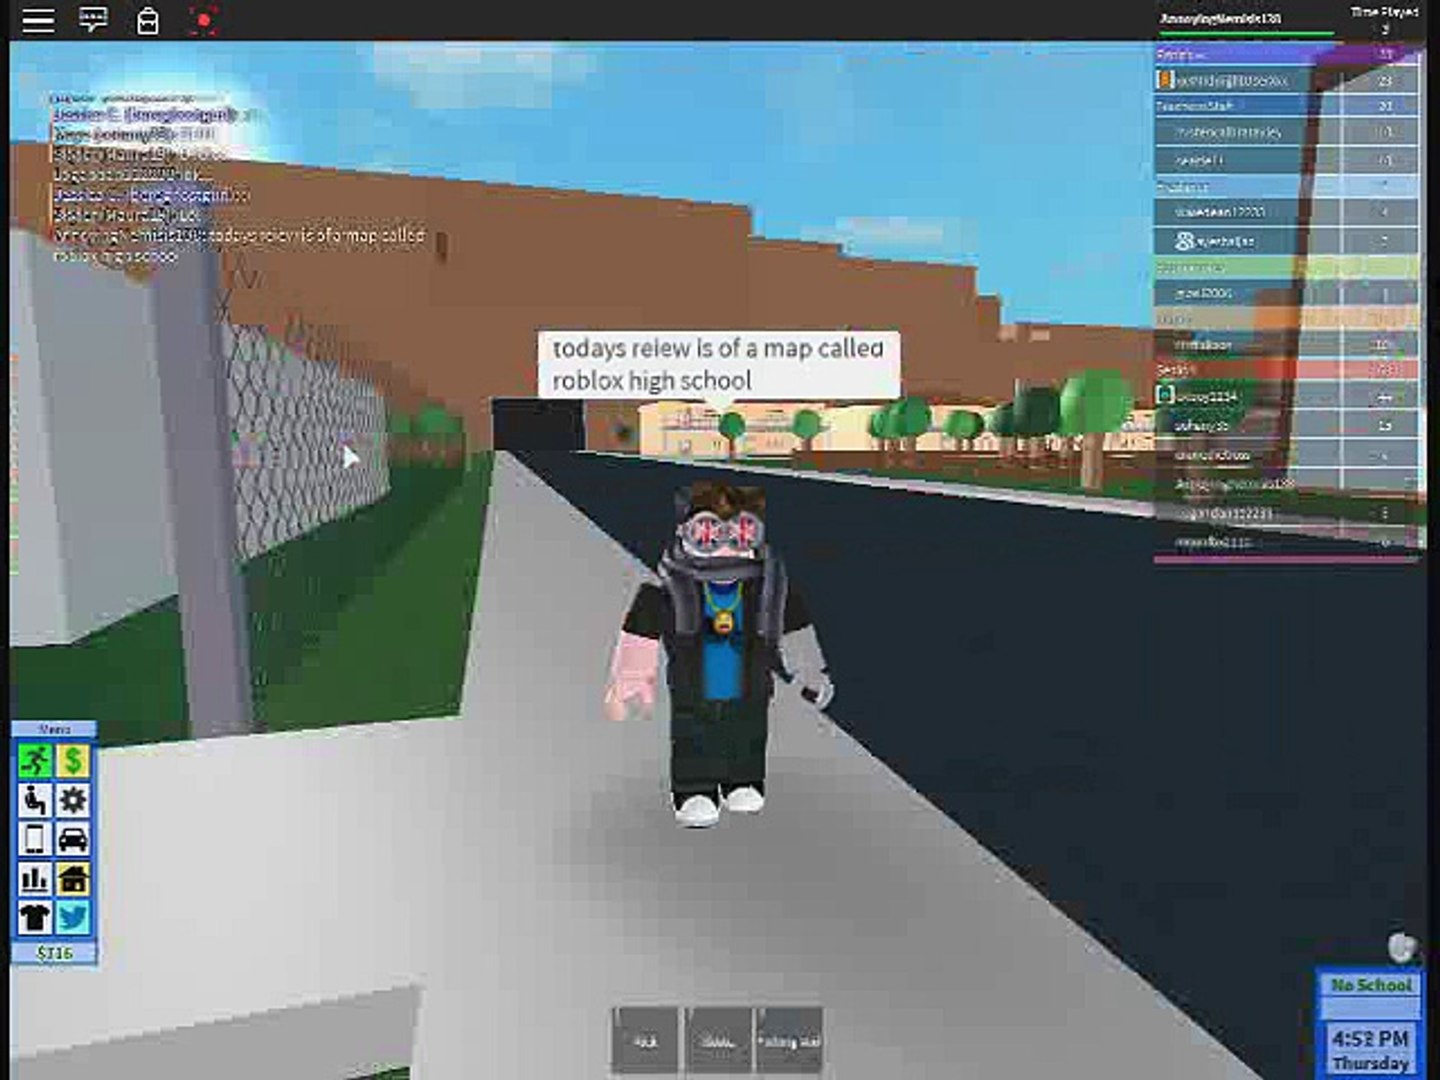 Roblox Map Review 3 Roblox High School Video Dailymotion - a normal week at roblox high school